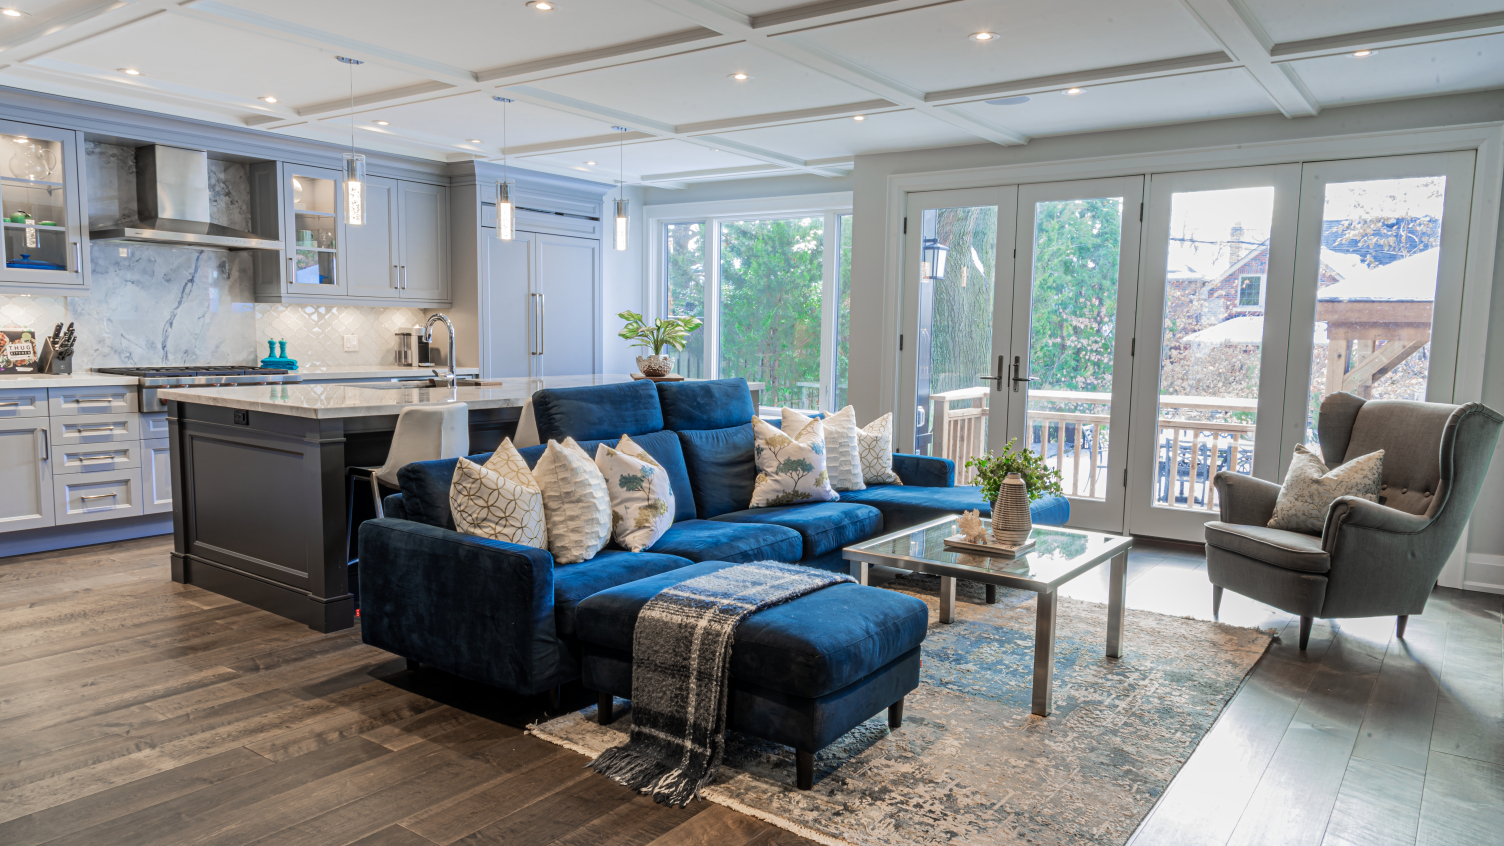 large, transitional open concept kitchen and living room with blue sofa and custom pillows